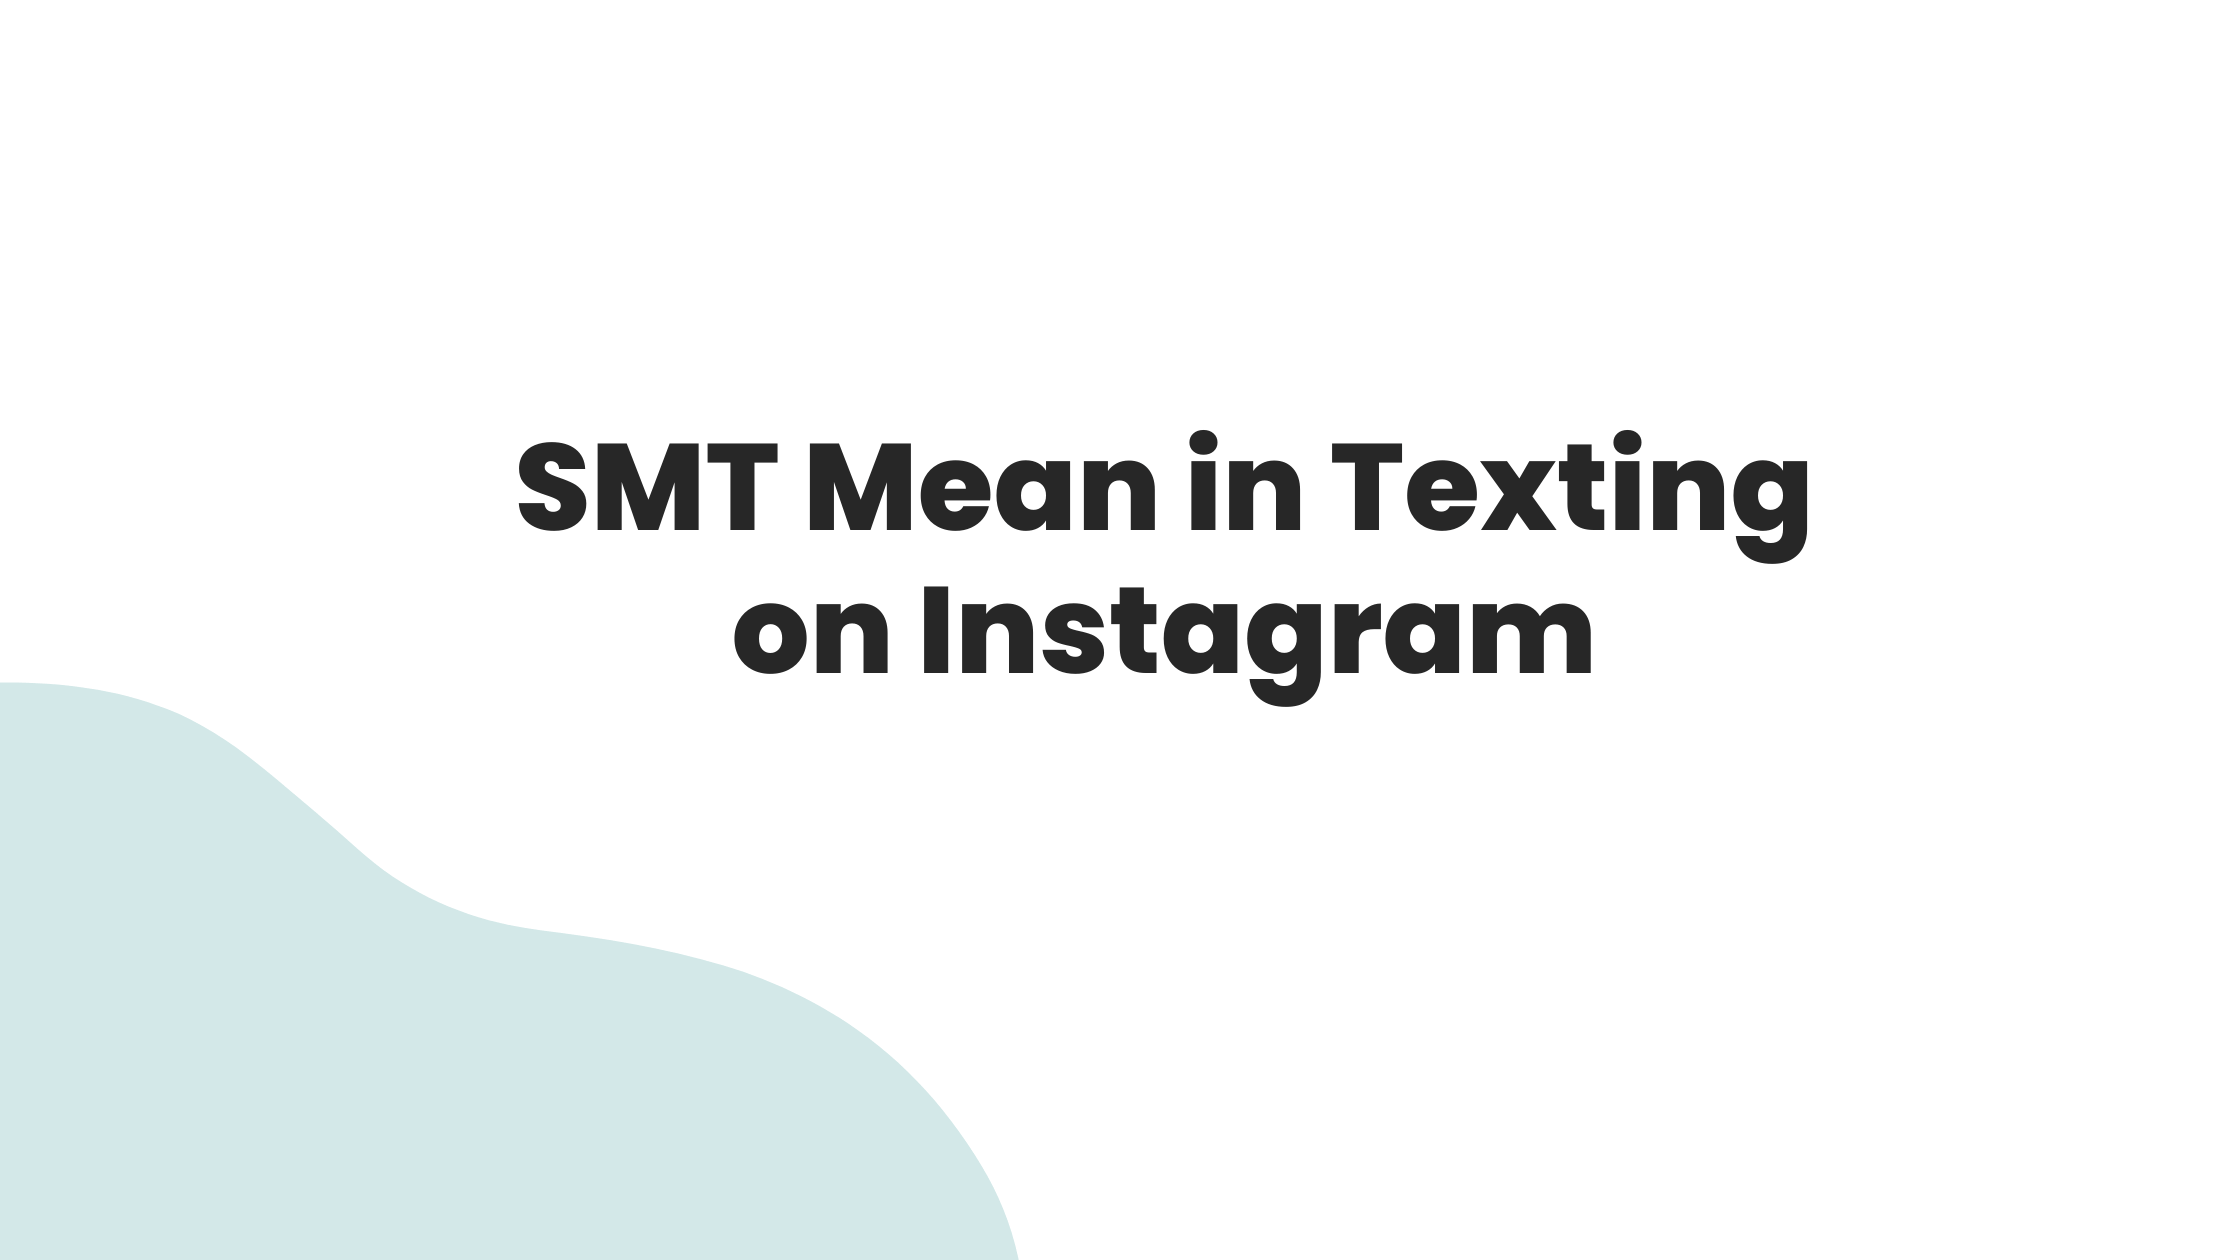 What Does SMT Mean in Texting on Instagram